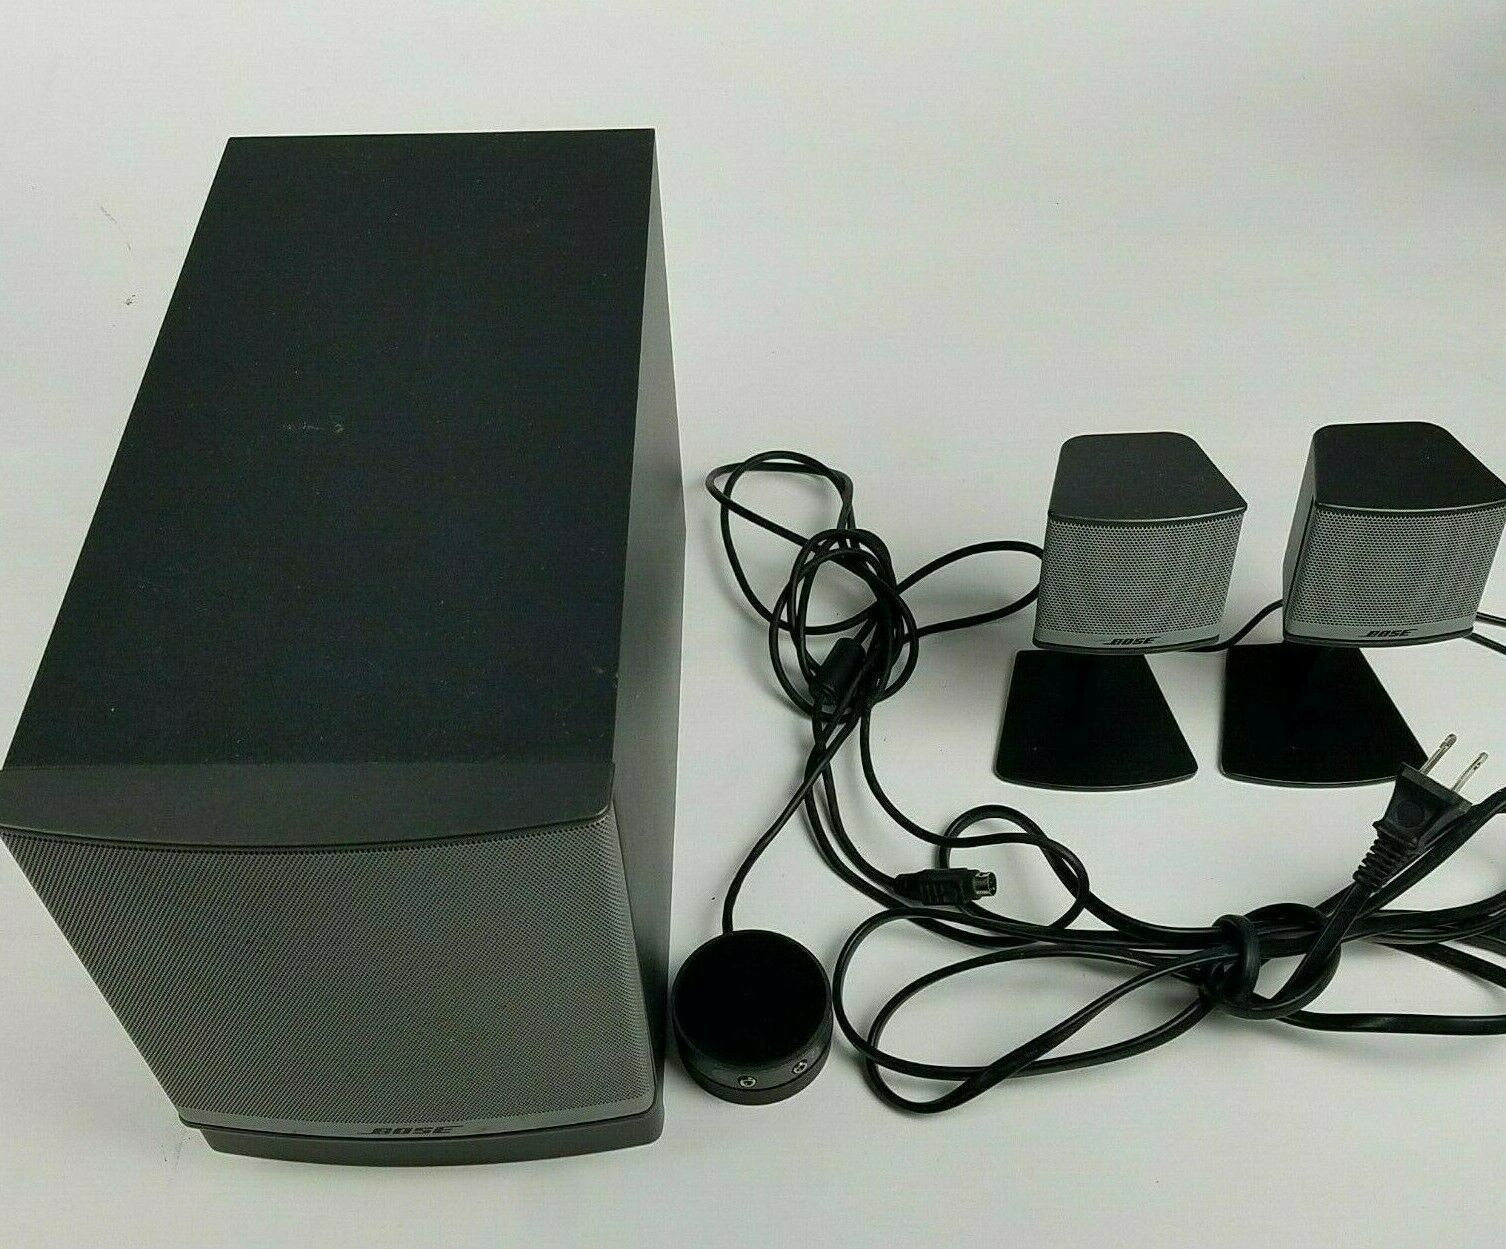 Bose companion series II surround sound speaker set for computer, tv or more.